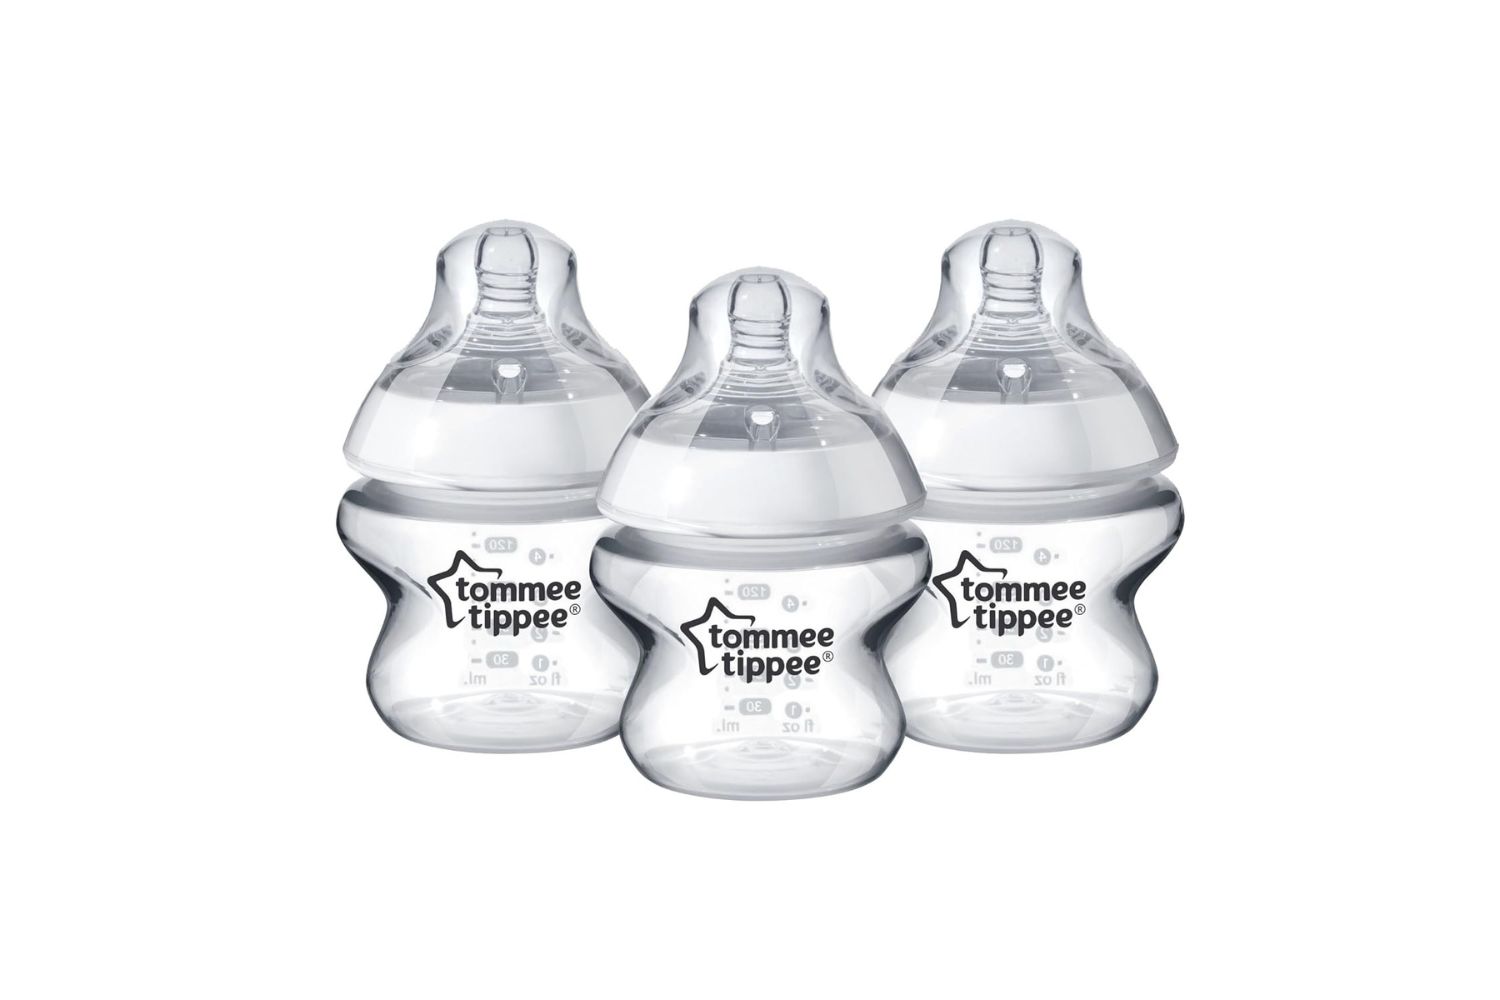 14-intriguing-facts-about-tommee-tippee